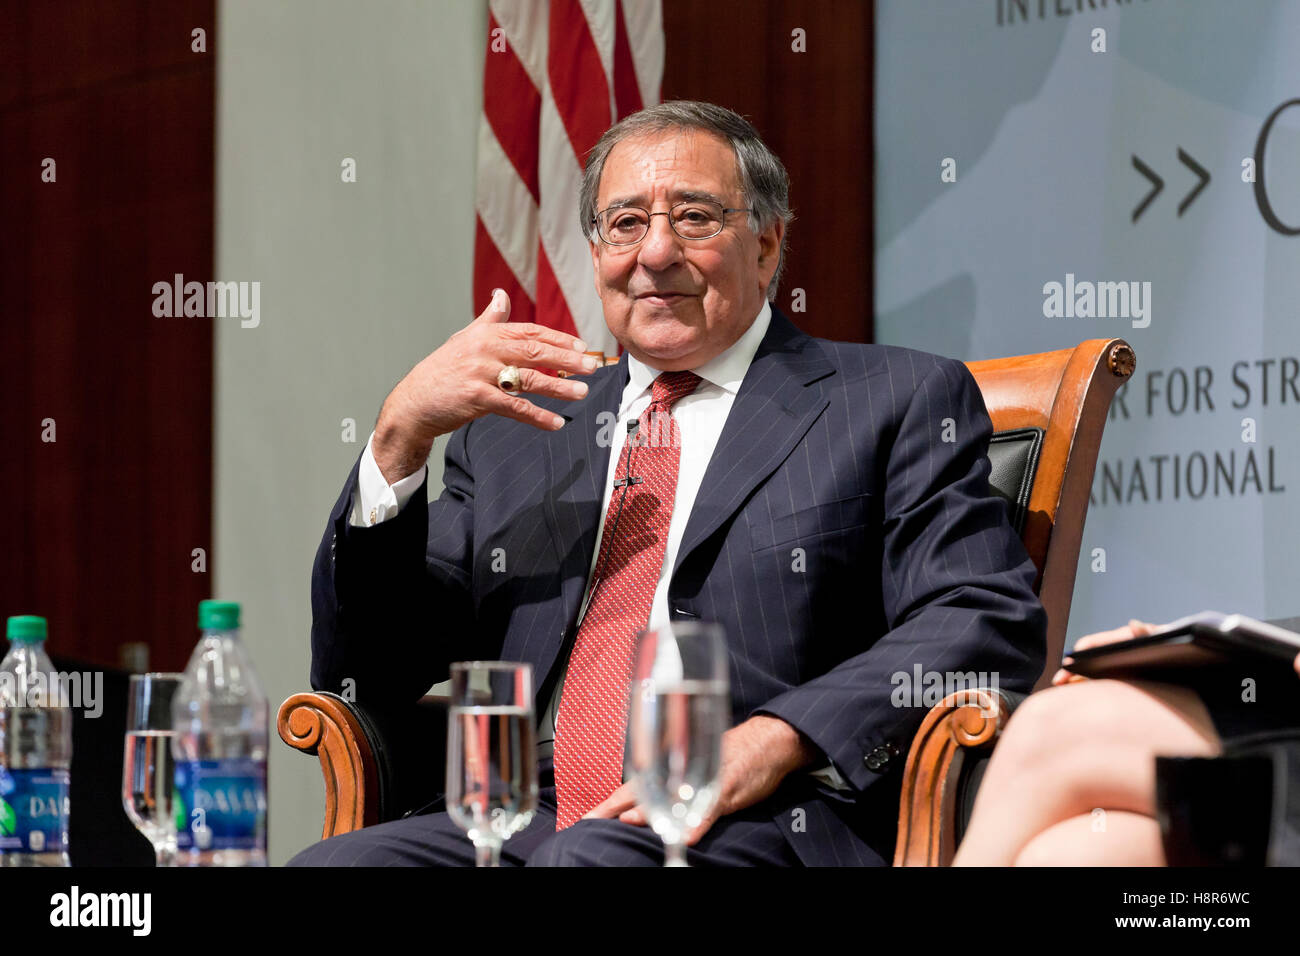 Washington, DC, USA. , . Former Secretary of Defense and Director of CIA, Leon Panetta, speaks at Center for Strategic & International Studies on 'Turning Point - A New Comprehensive Strategy for Countering Violent Extremism' program launch. Credit:  B Christopher/Alamy Live News Stock Photo